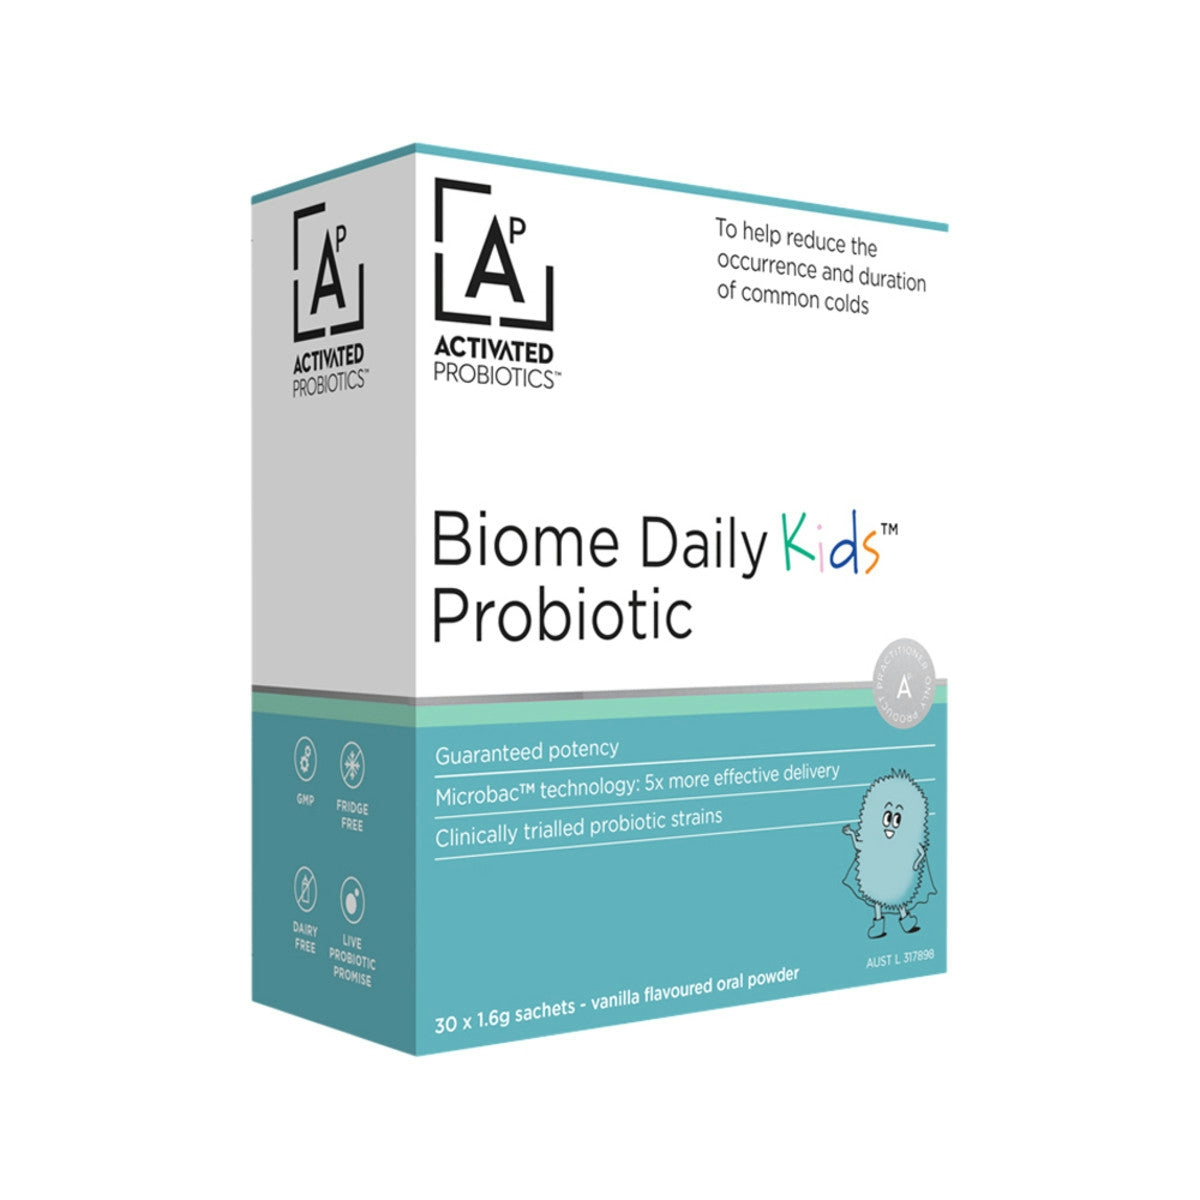 image of Activated Probiotics Biome Daily Kids Probiotic Vanilla Sachets 1.6g x 30 Pack on white background 